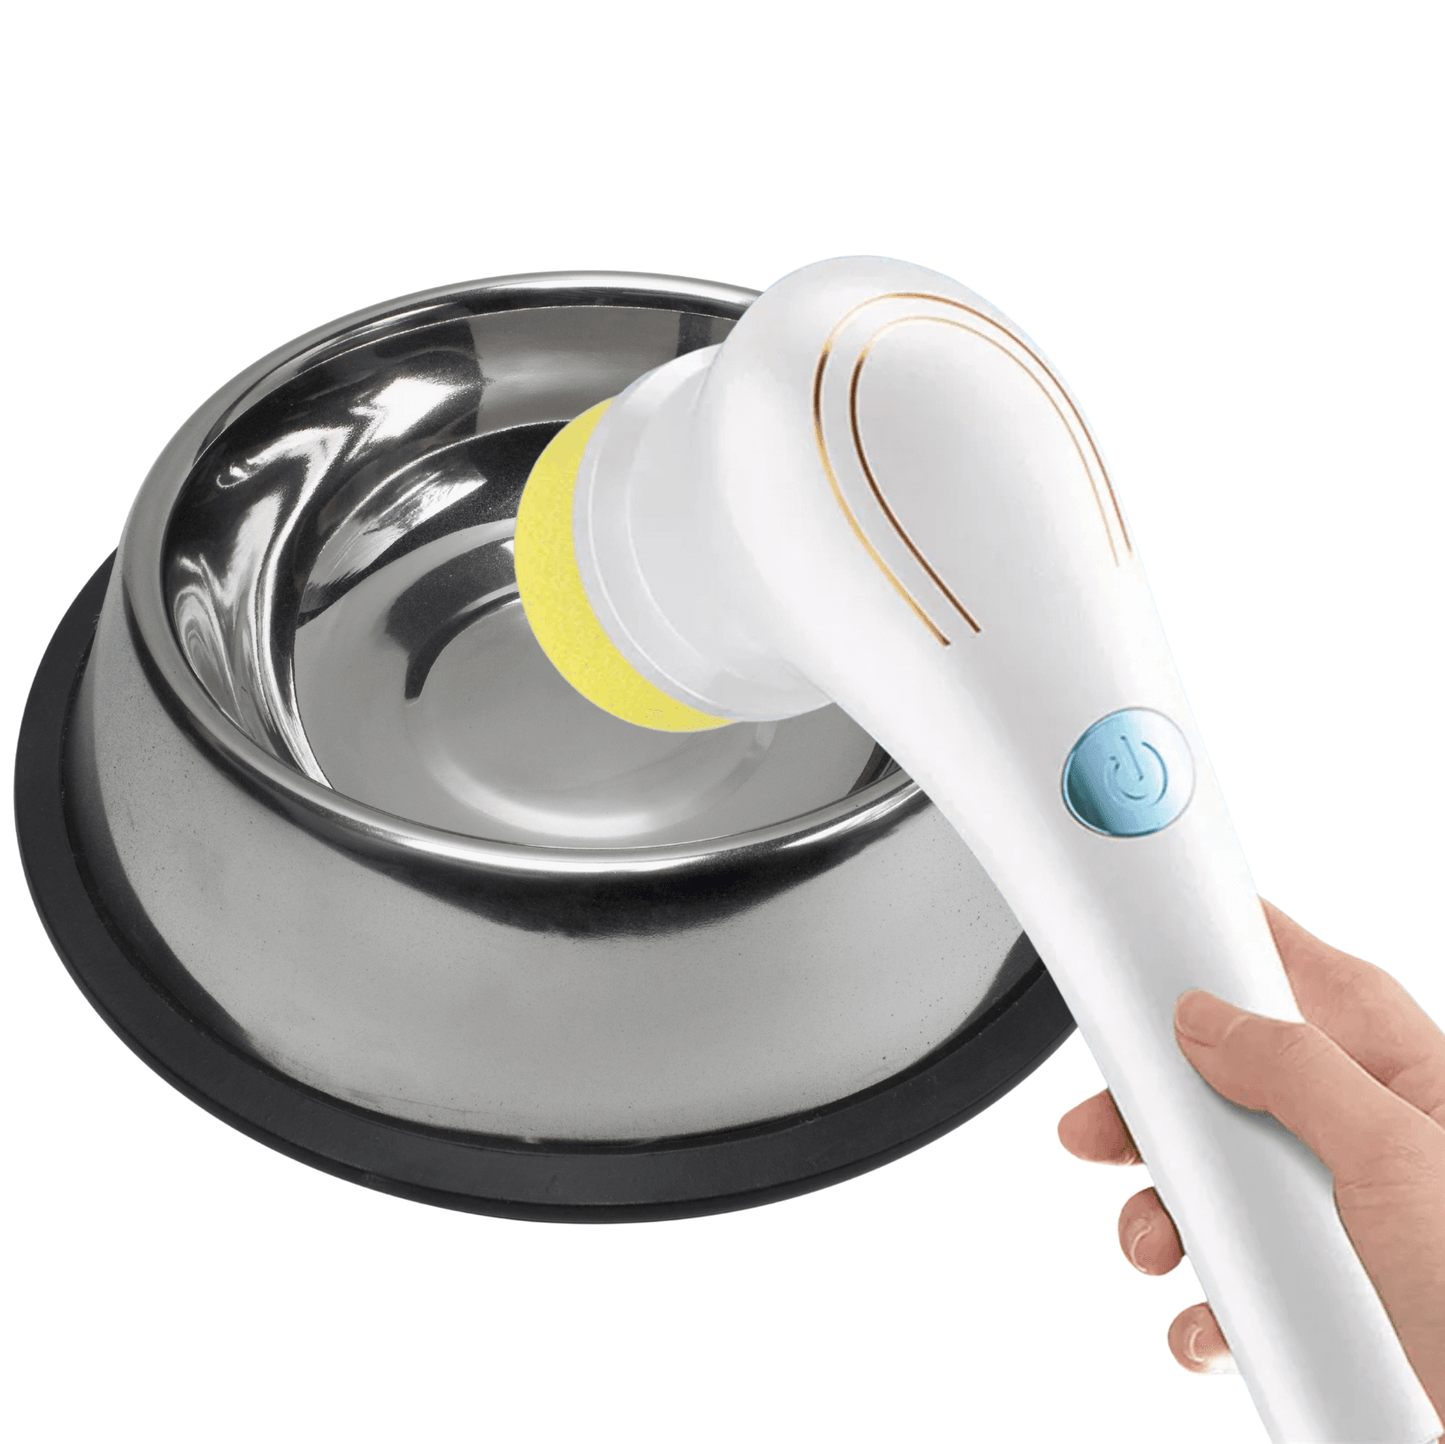 Electric Brush Cleaner-Dog Dish Bowl Cleaner-Cat water Fountaining Cleaner-Clean Faster & Easier-5 Heads-Many Uses